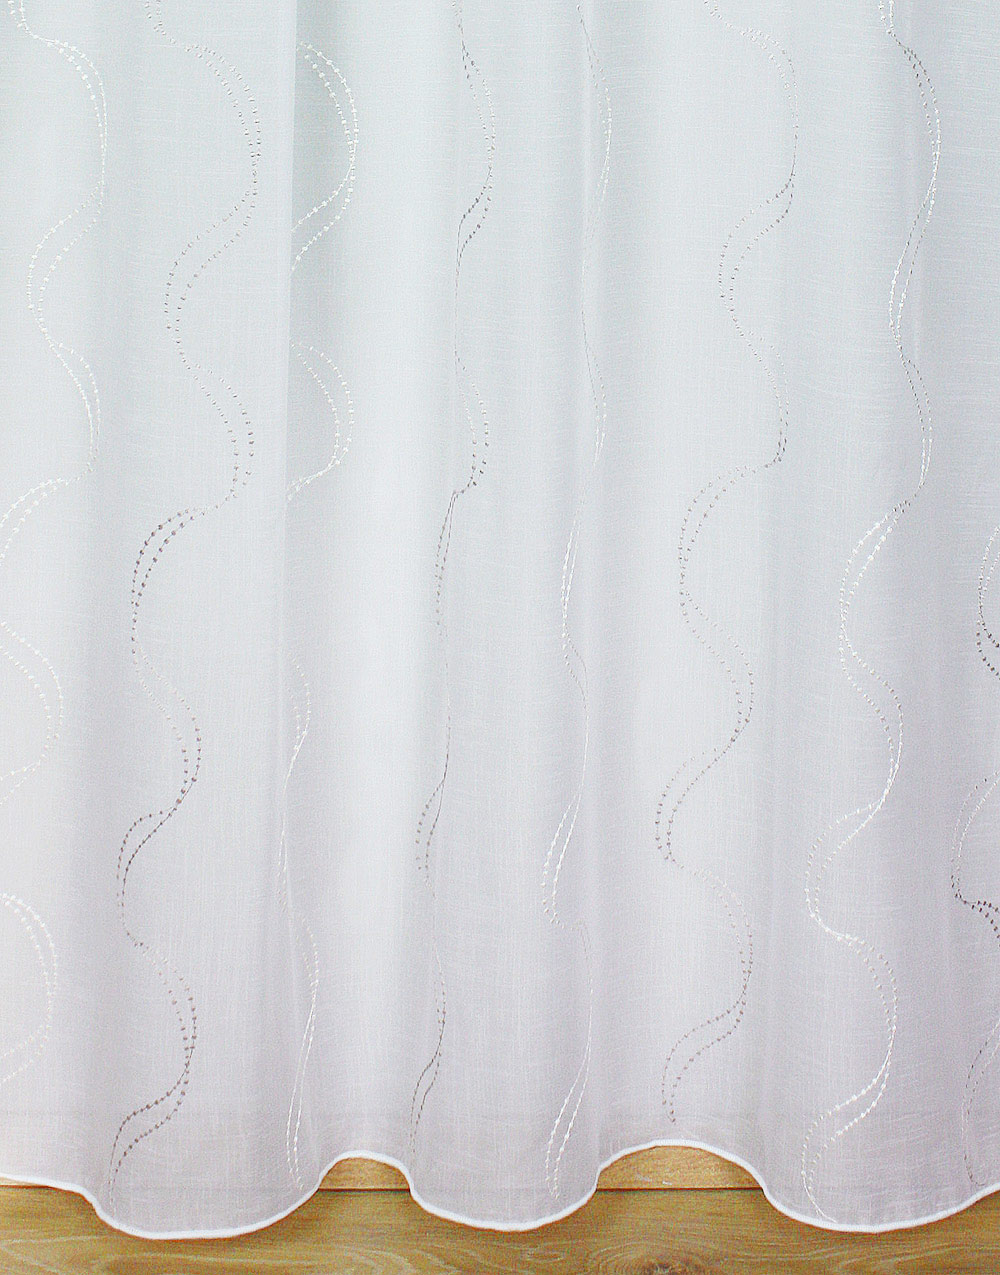 Sheer curtain with cream embroidery